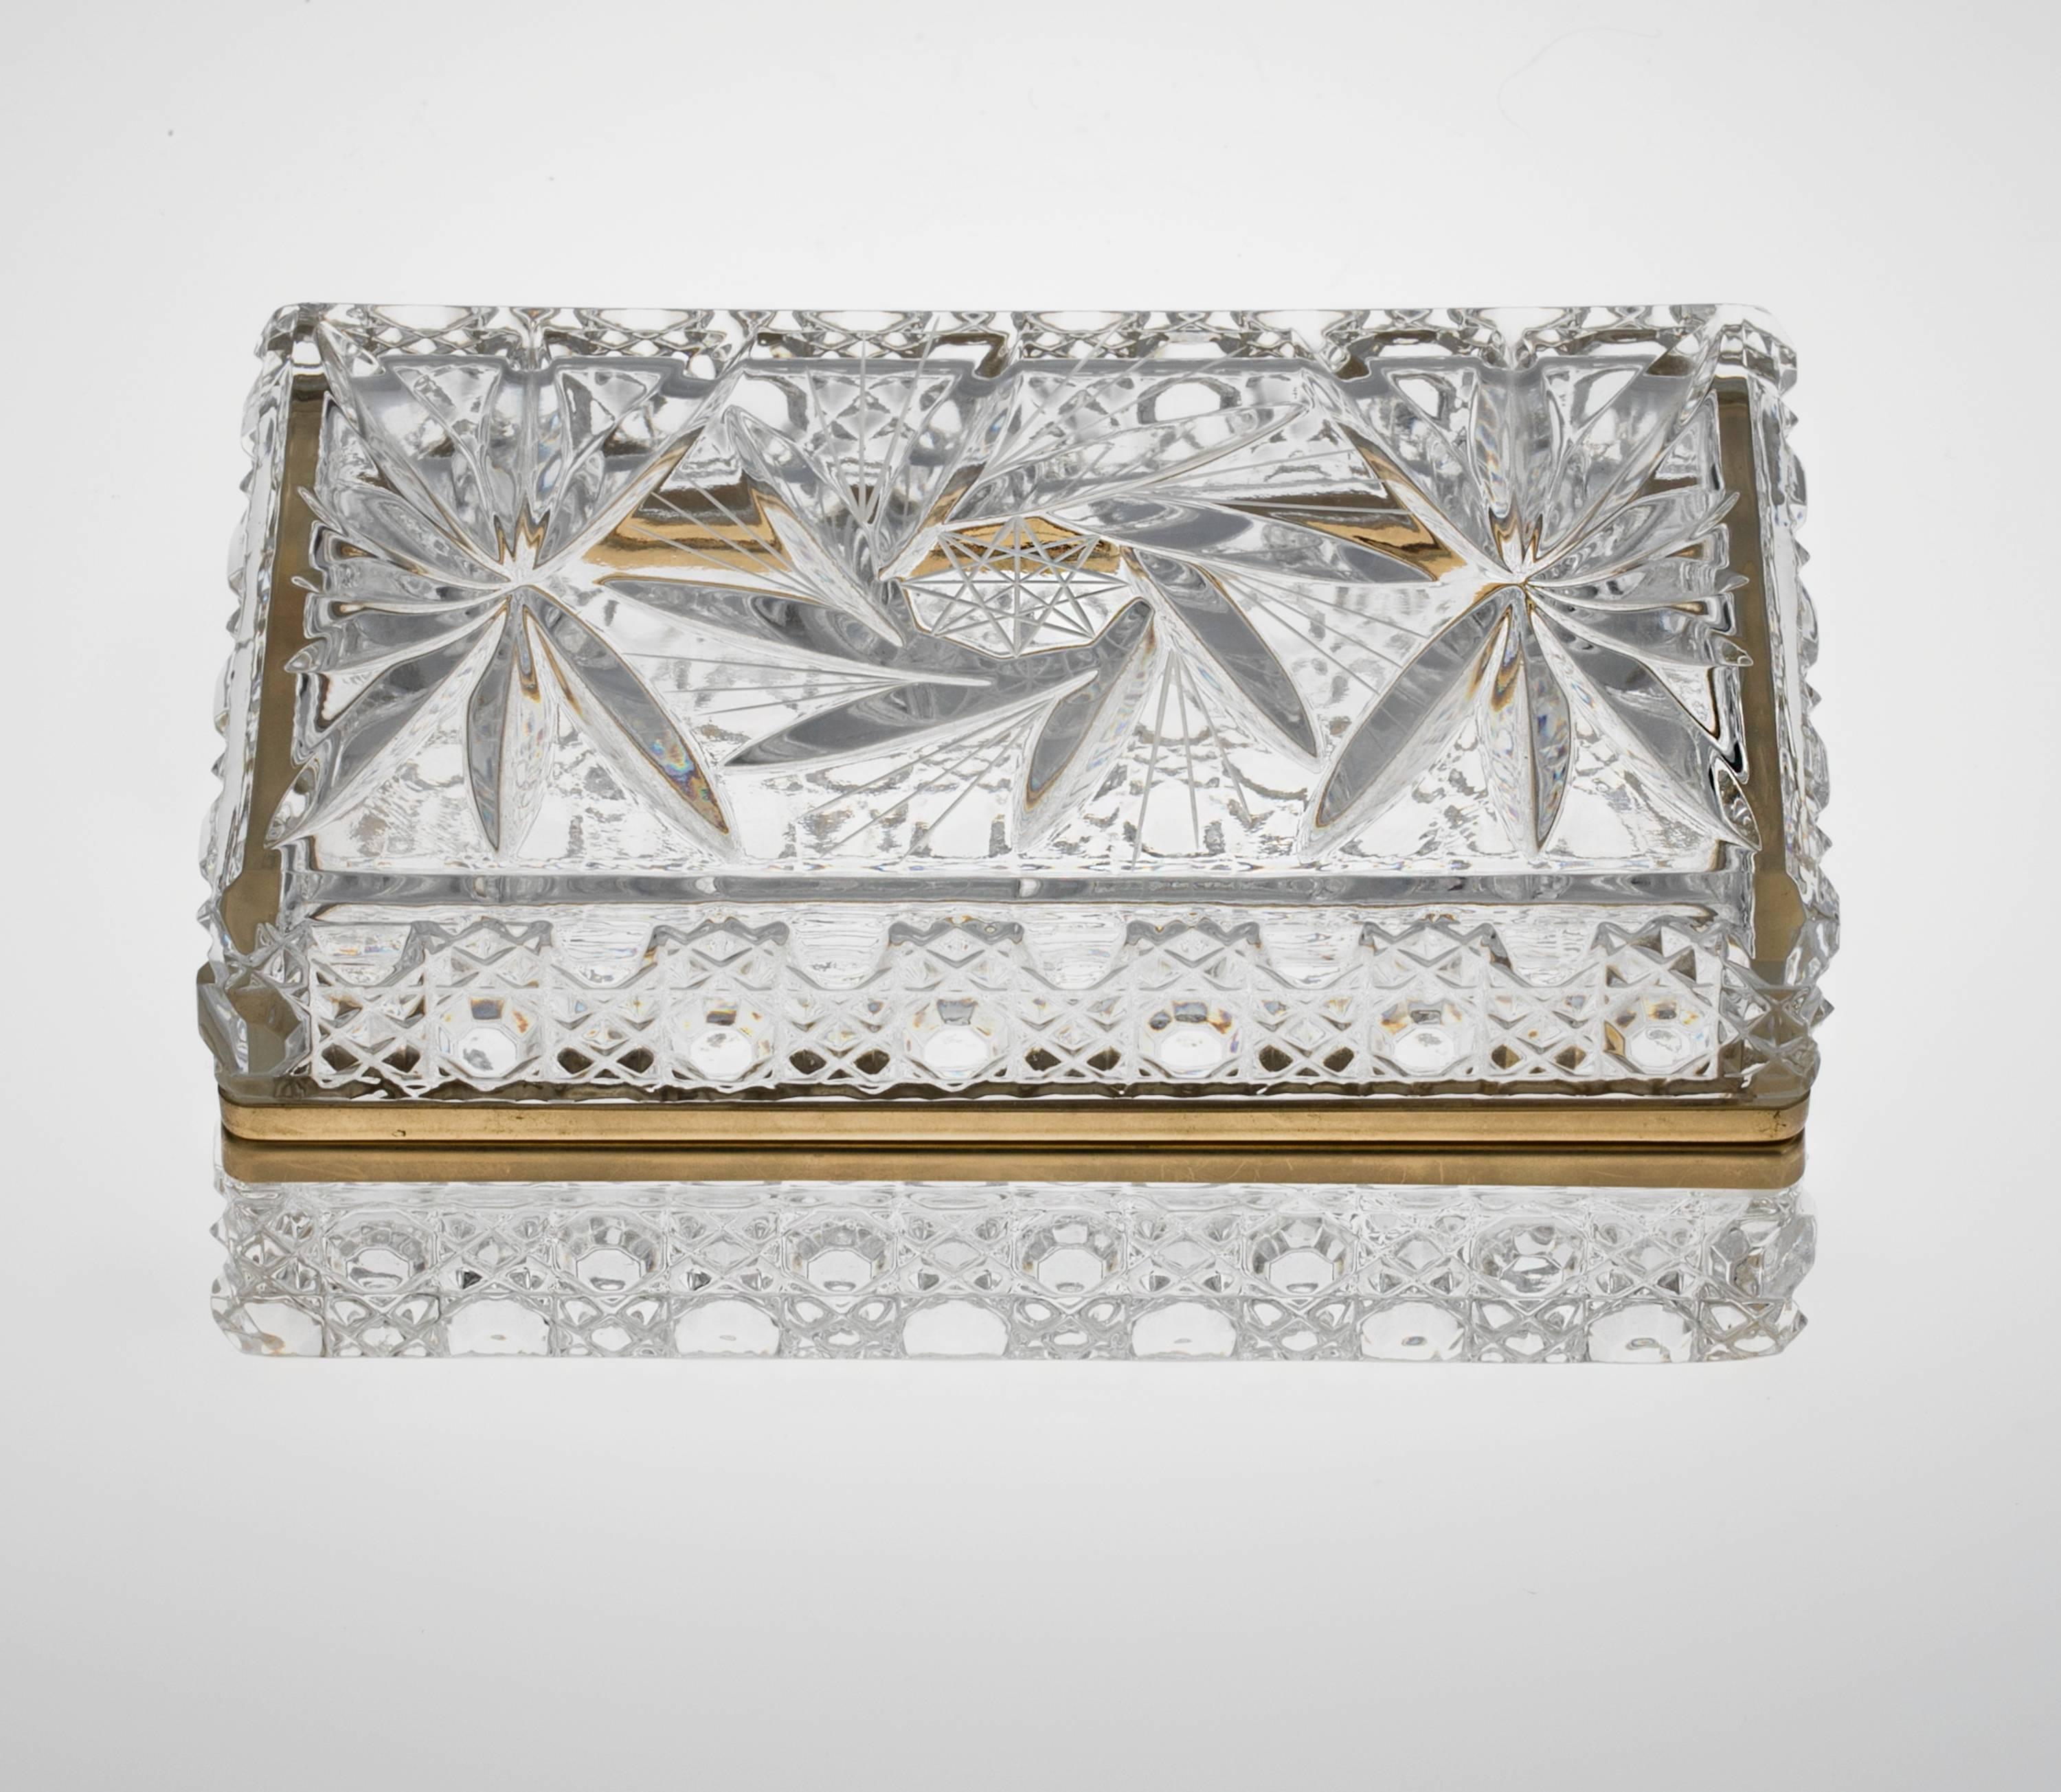 Beautiful cut crystal box with gilt bronze hinge mount. Top panel is cut fan shape flowers and base is well cut diamond panels.
Elegant lovely addition to your dressing table.